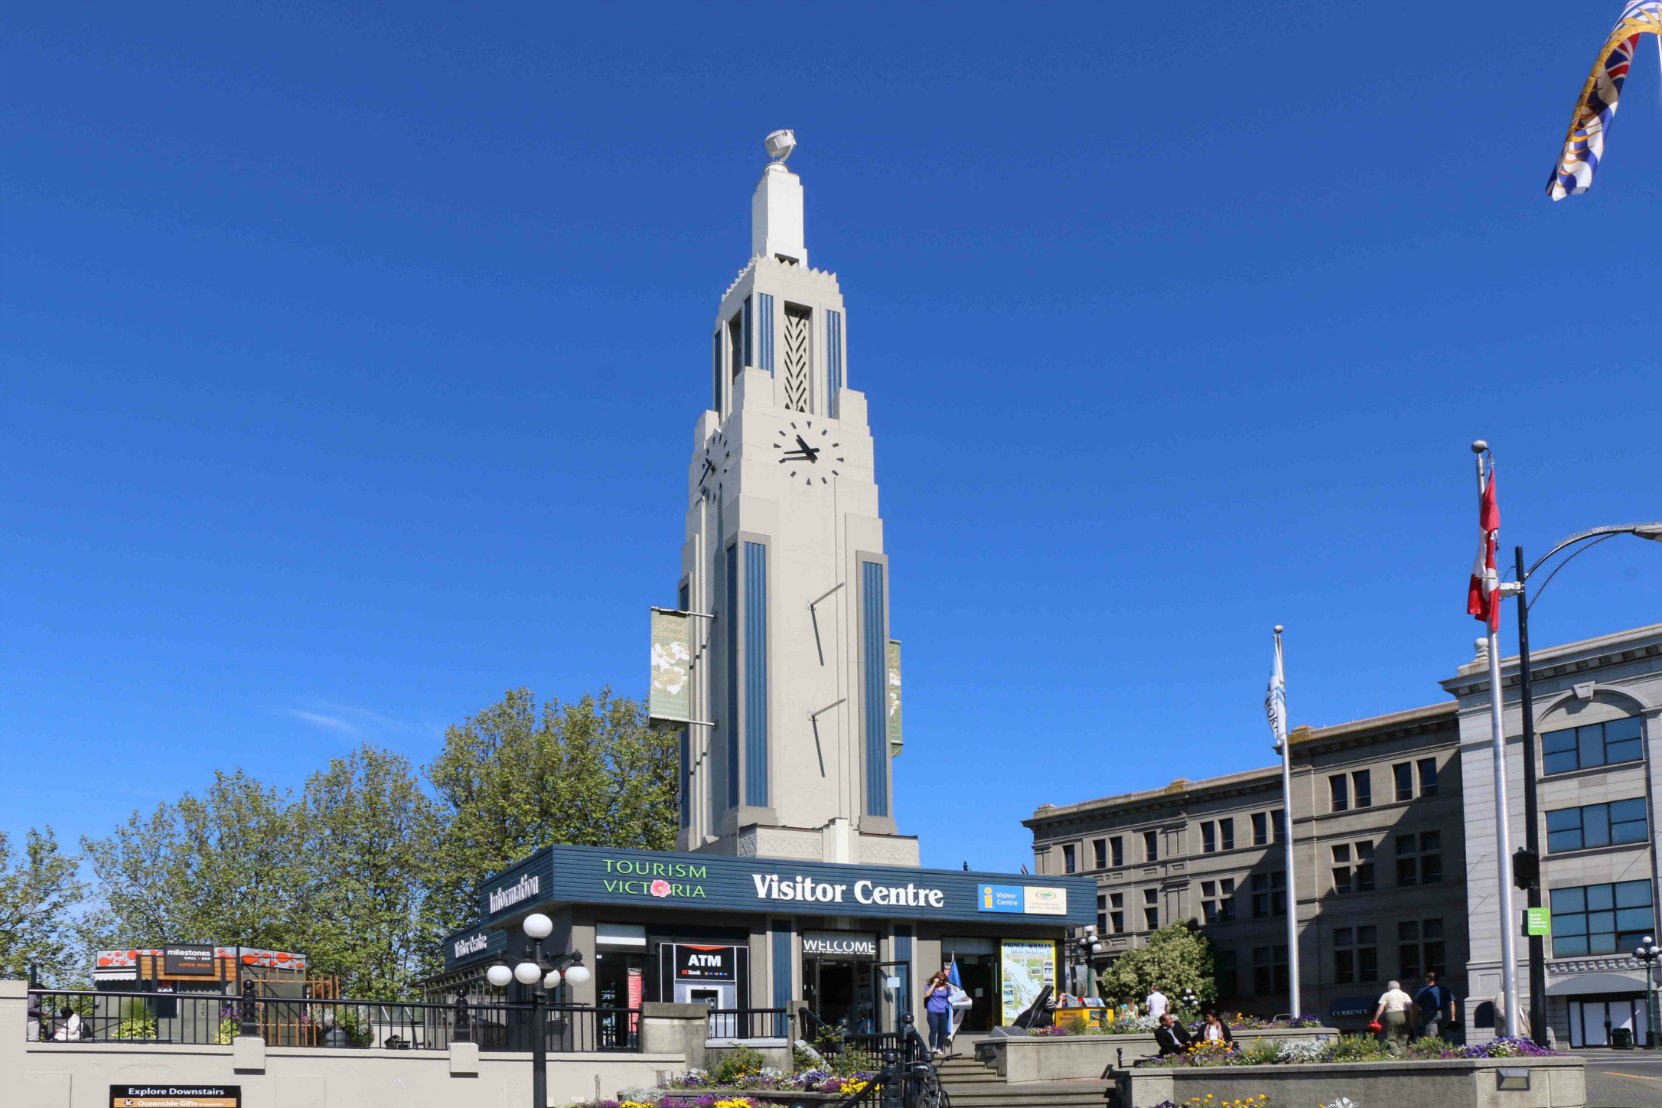 The Tourism Victoria Visitor Centre, 812 Wharf Street. This Art Deco building was originally built in 1931 by Imperial Oil as a service station. (photo by Victoria Online Sightseeing Tours)